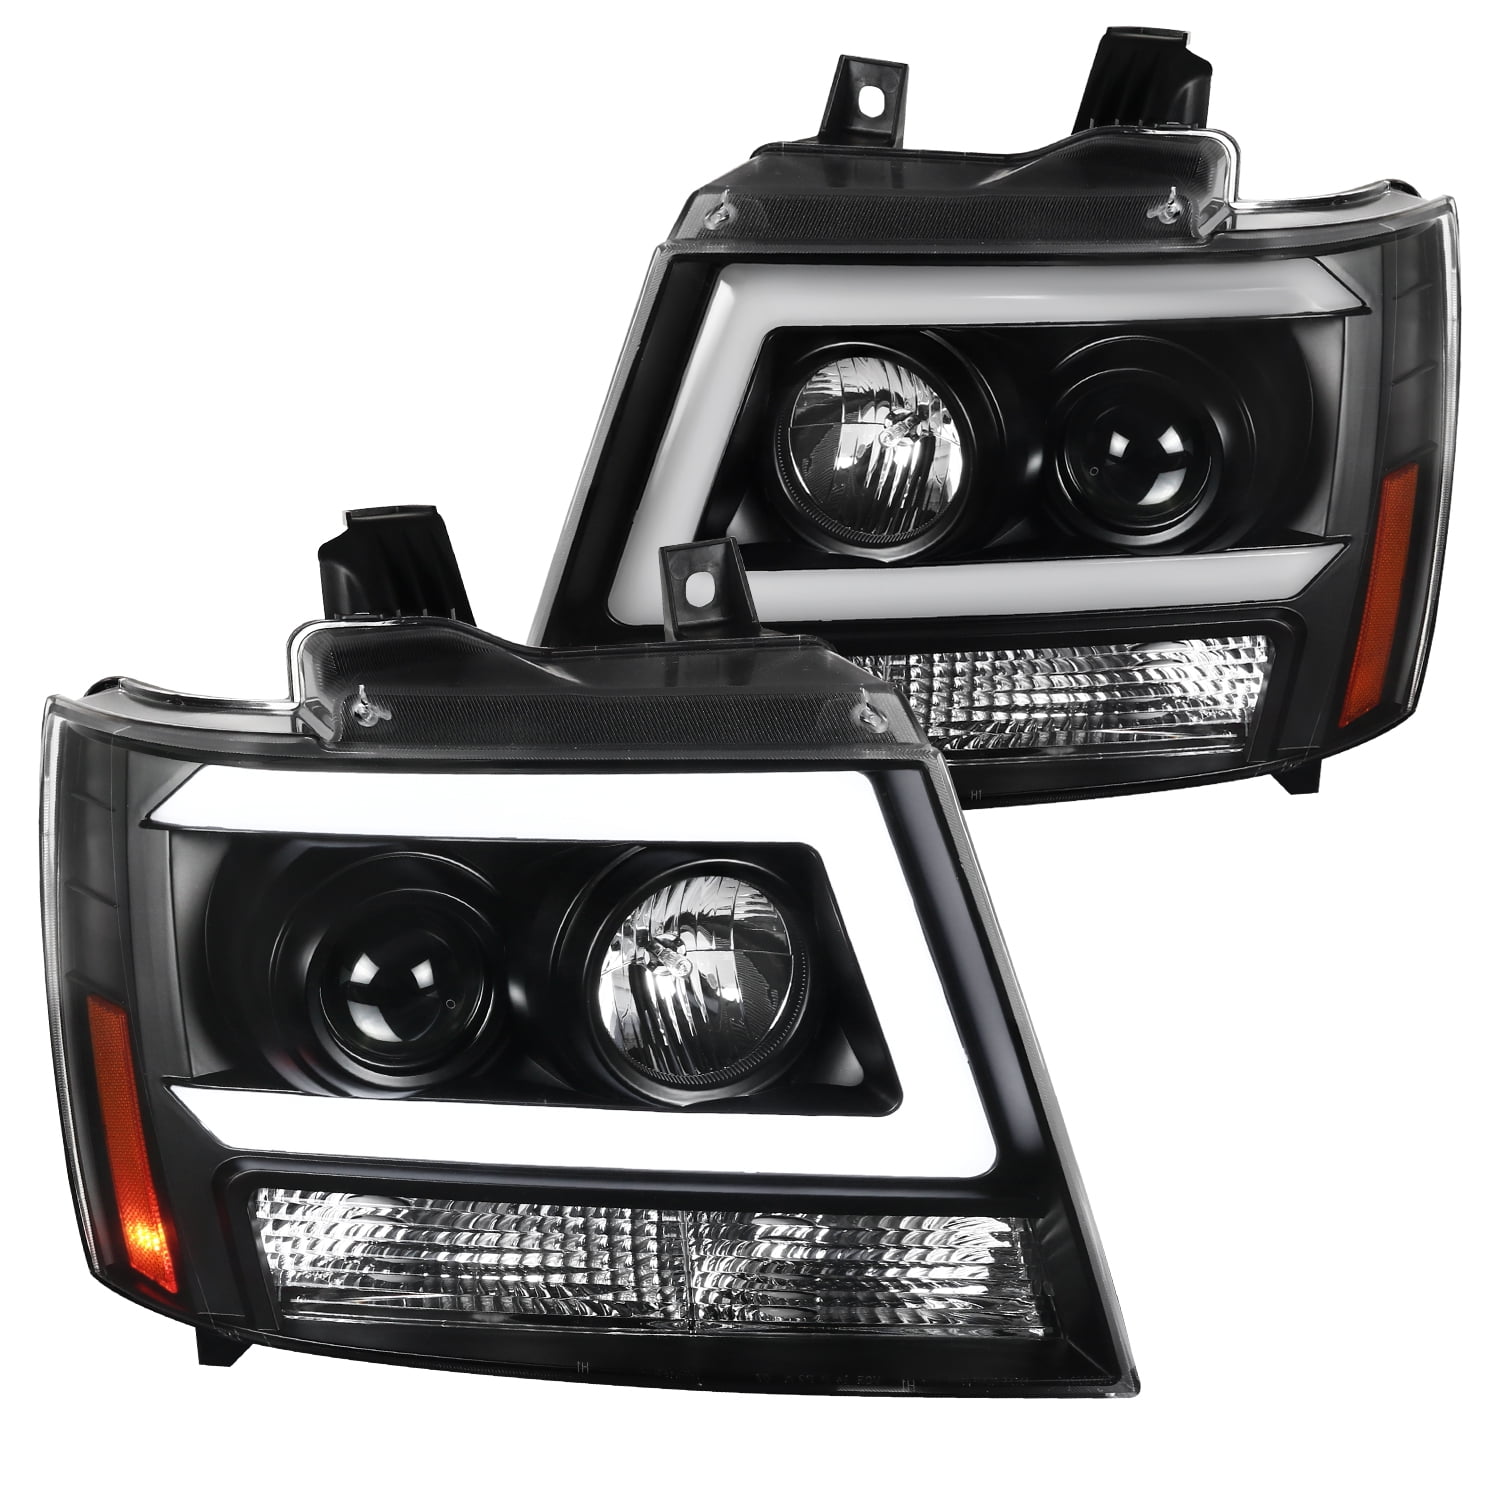 L+R Pair Head Light Lamp Assembly Spec-D Tuning LED Strip Glossy Black Projector Smoke Headlights Signal Compatible with Chevy Avalanche 2007-2013 2007-2014 Tahoe Suburban 